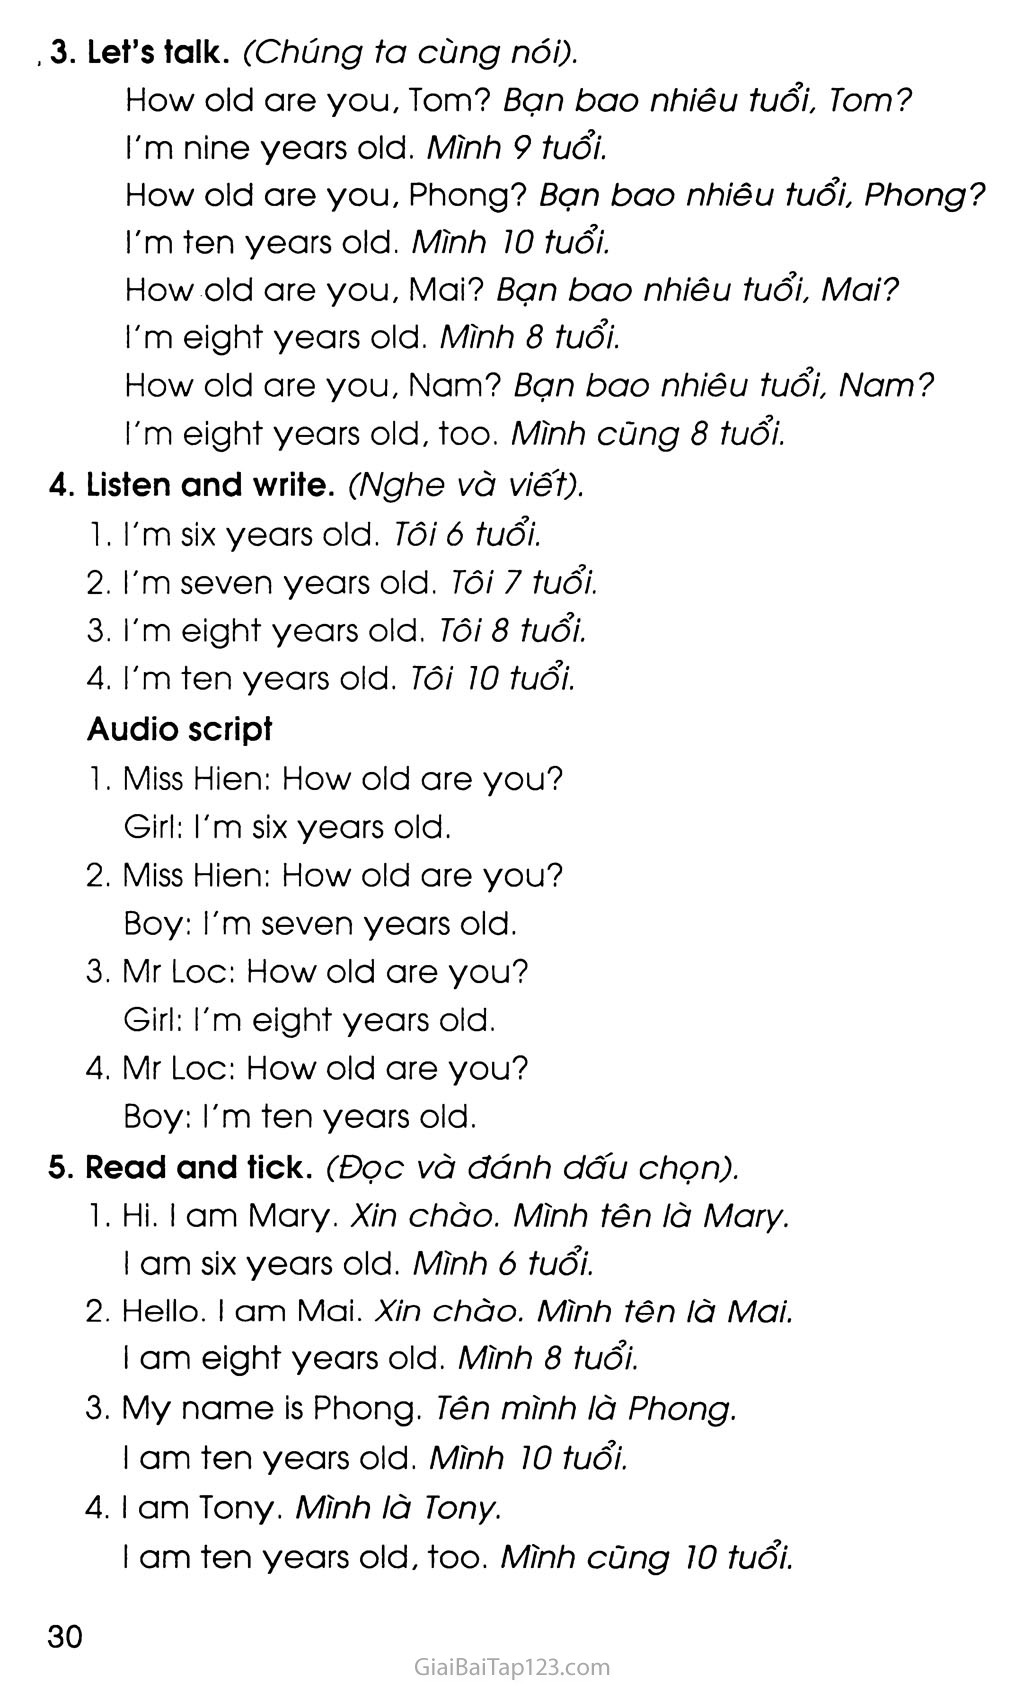 UNIT 4: HOW OLD ARE YOU? trang 4